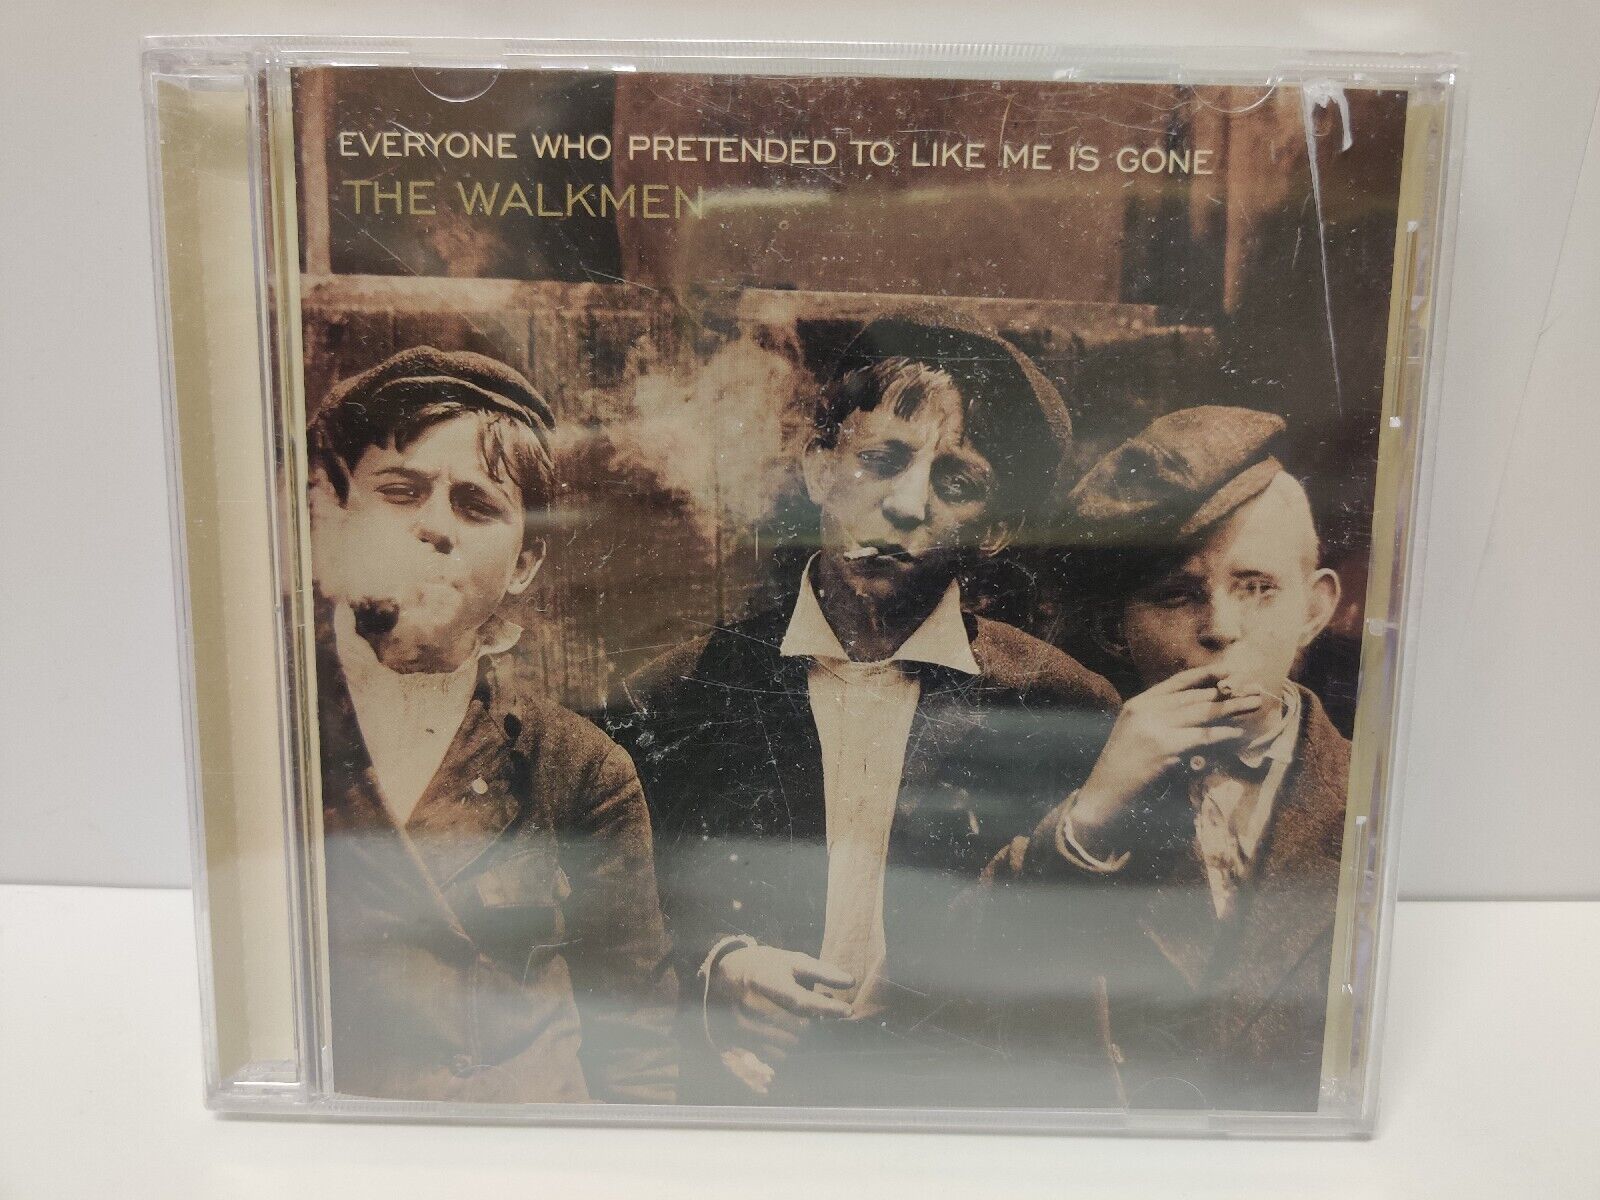 The Walkmen - Everyone Who Pretended to Like Me Is Gone (2004) CD